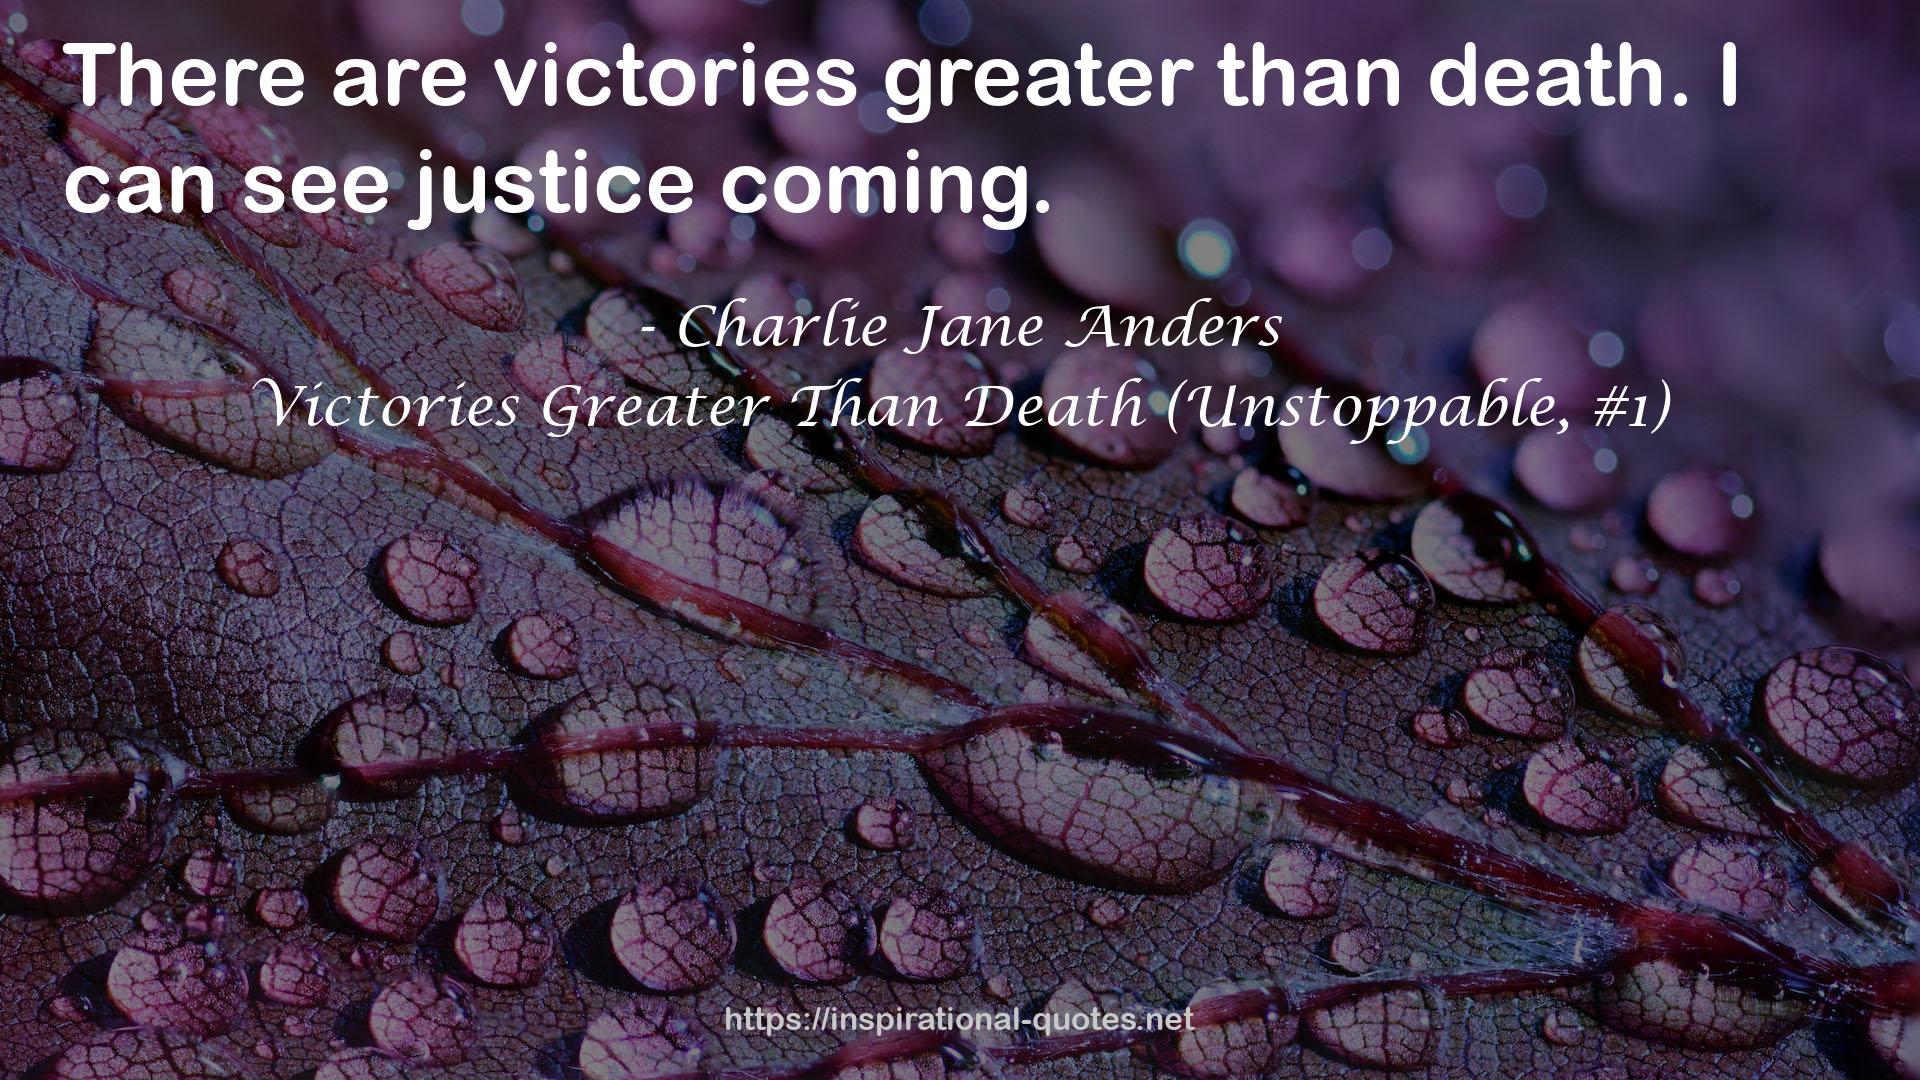 Victories Greater Than Death (Unstoppable, #1) QUOTES